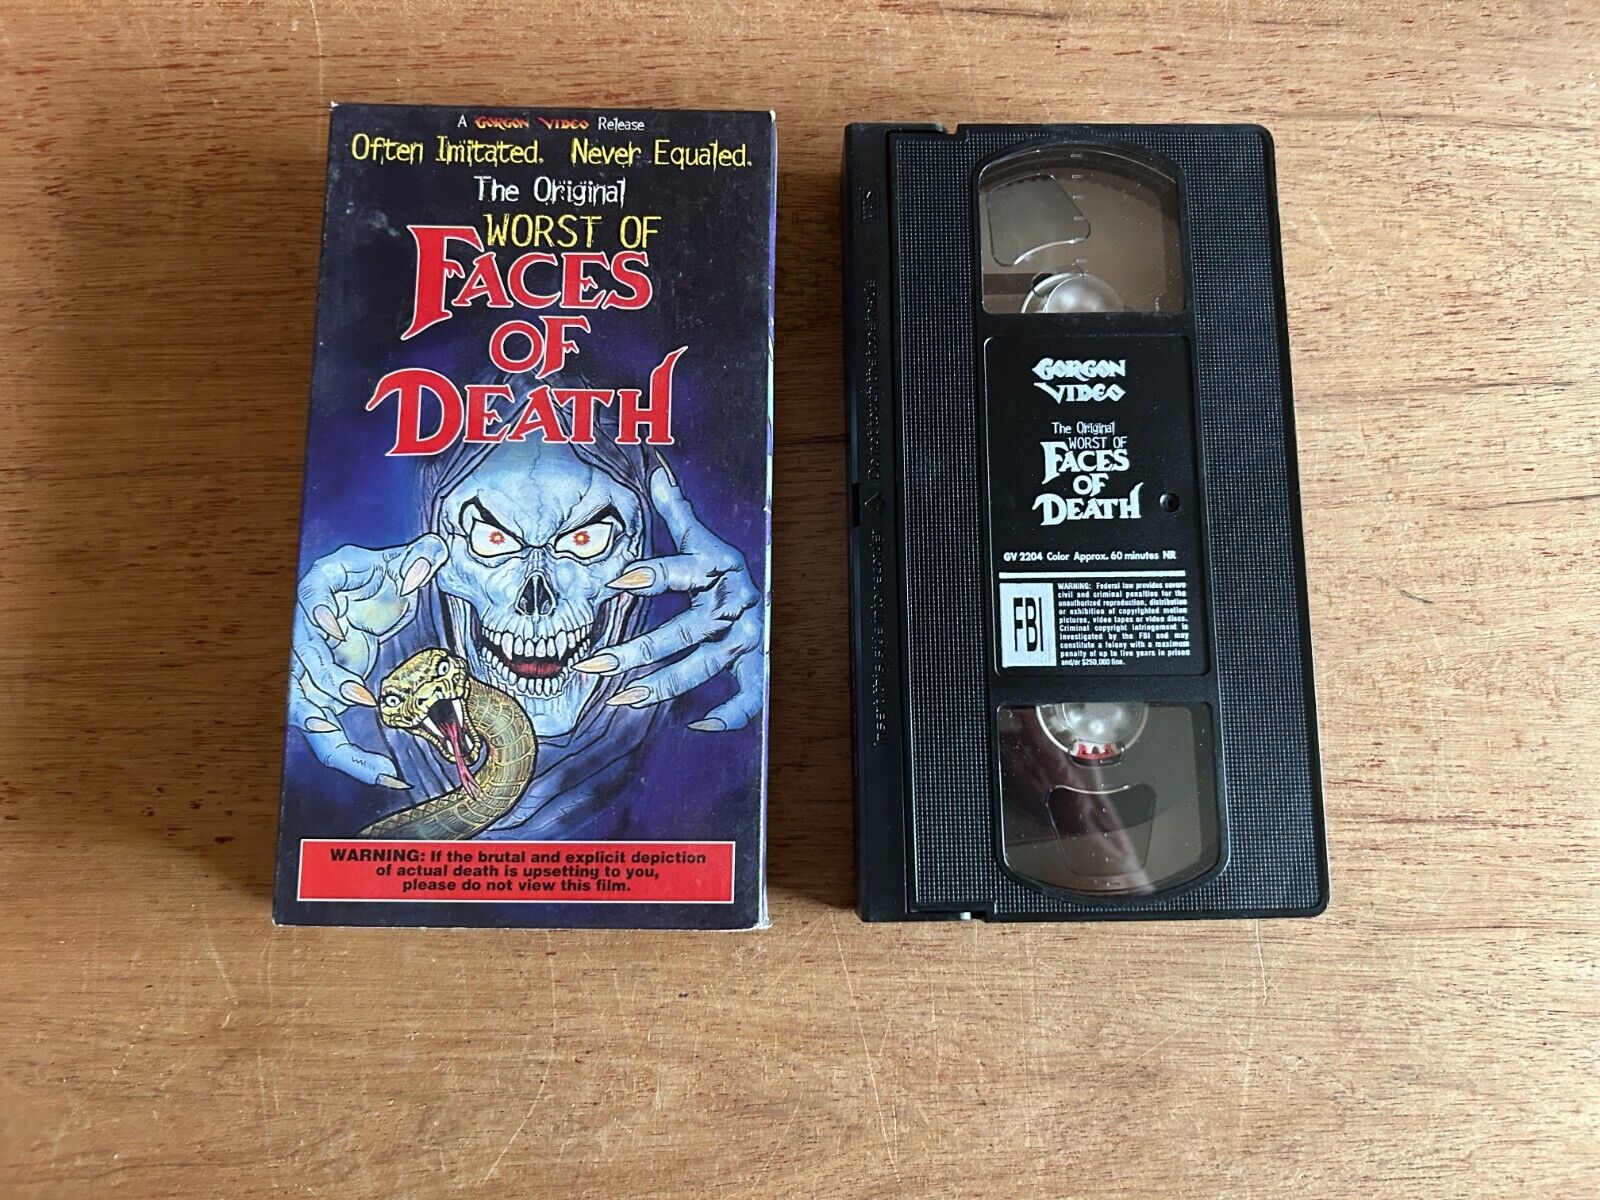 VHS Original Wolstof Faces Great Cover Art Graphics Often Imitated Vintage